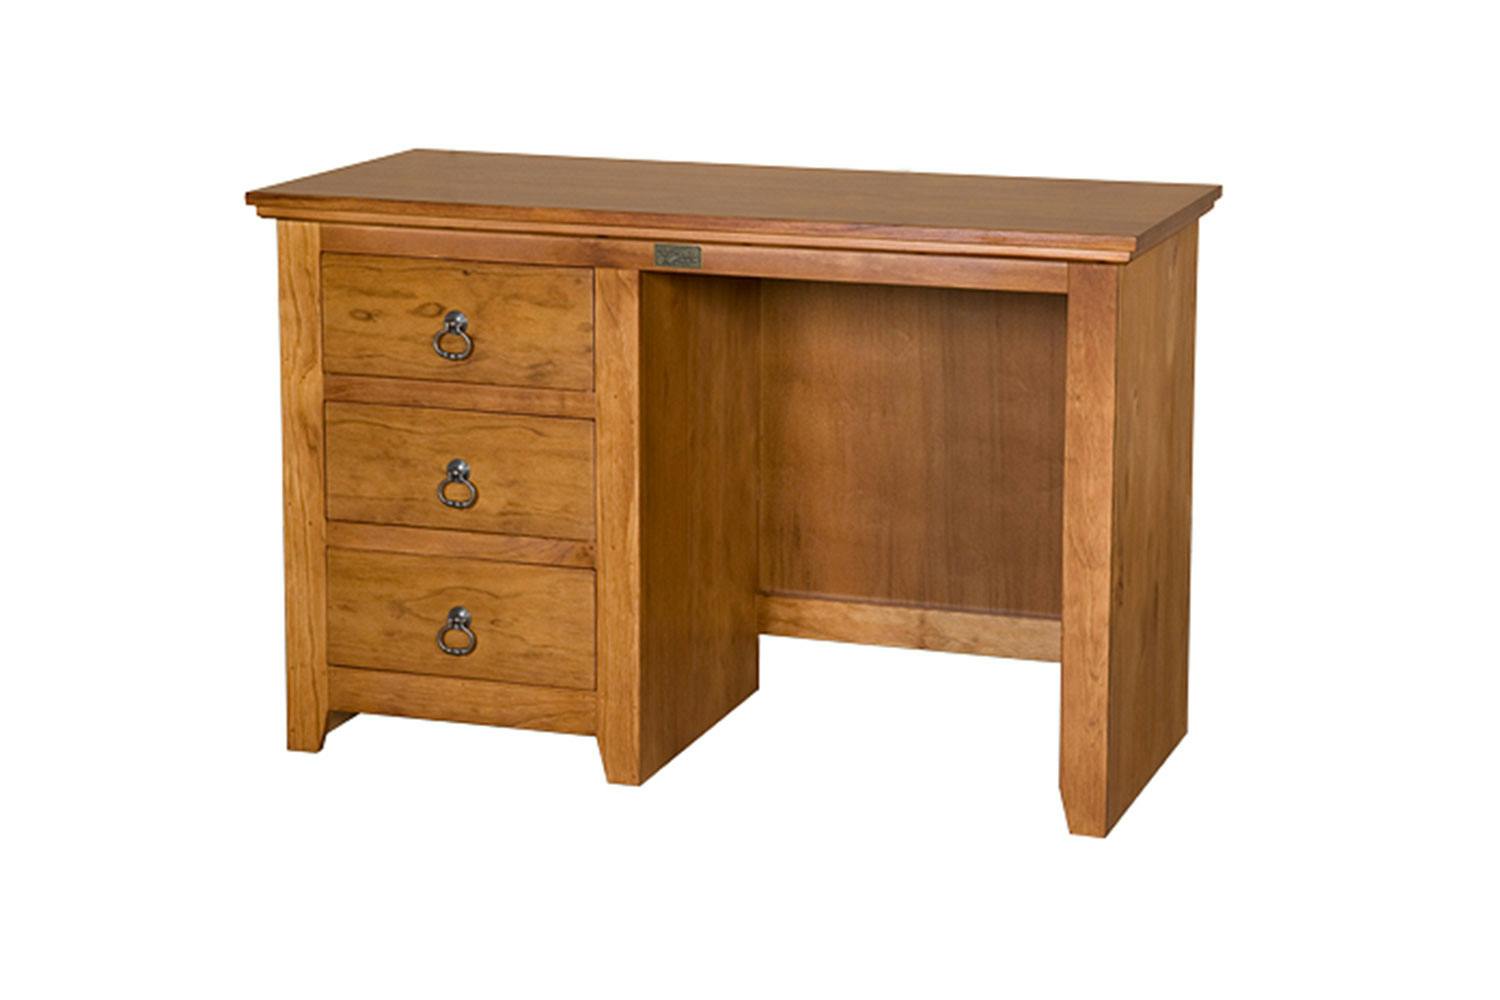 Ferngrove Small 3 Drawer Desk by Coastwood Furniture Harvey Norman